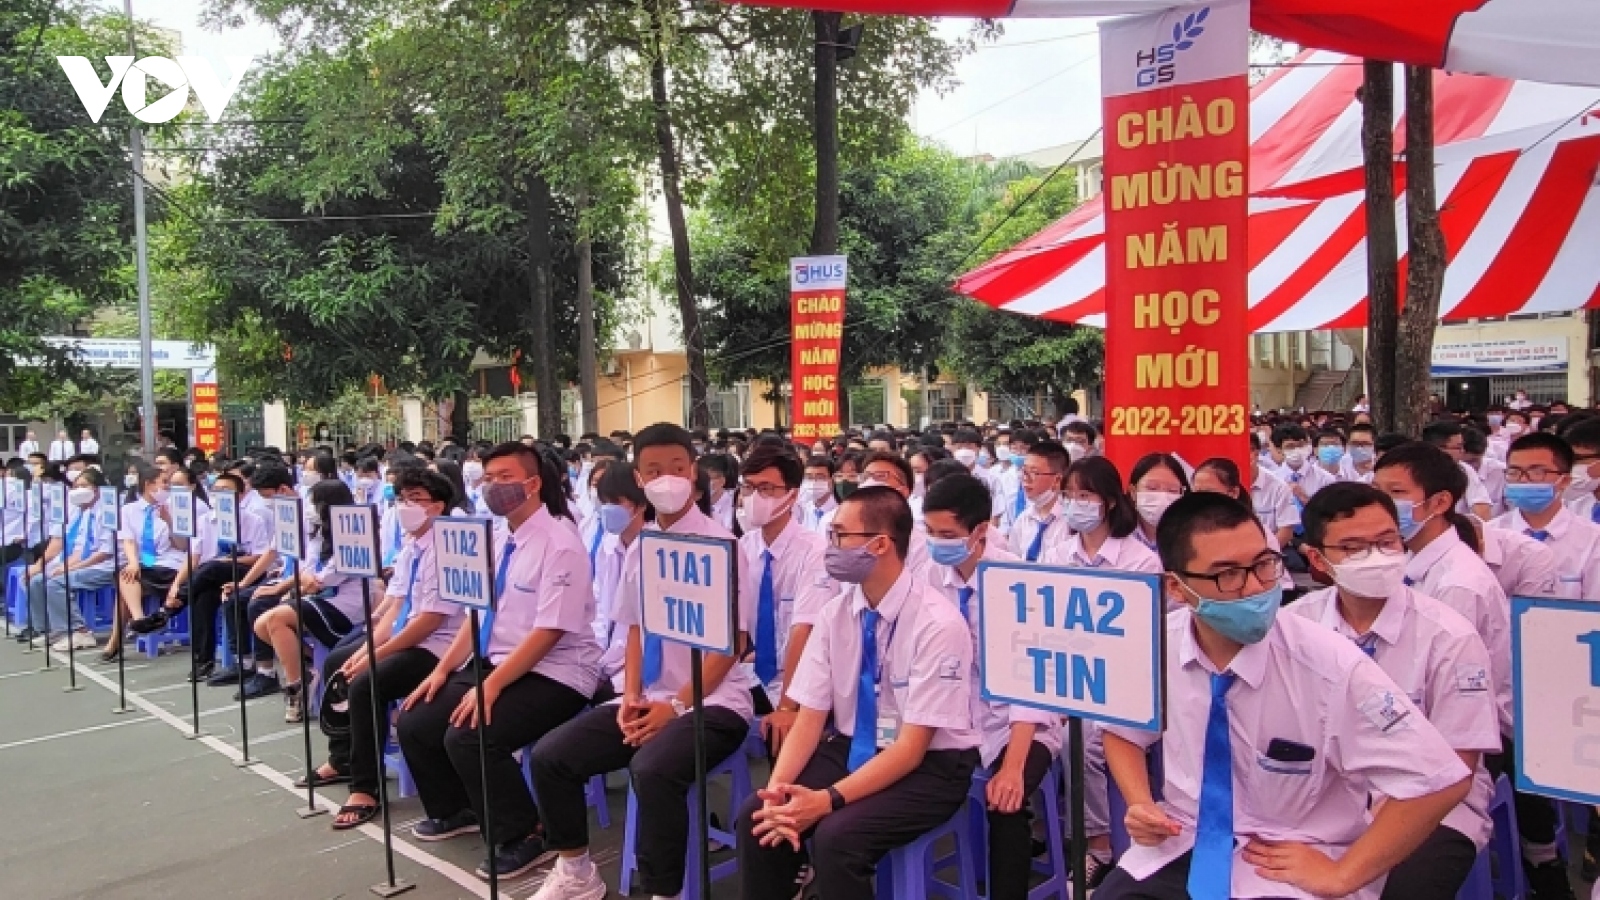 More than 23 million students begin new school year in Vietnam